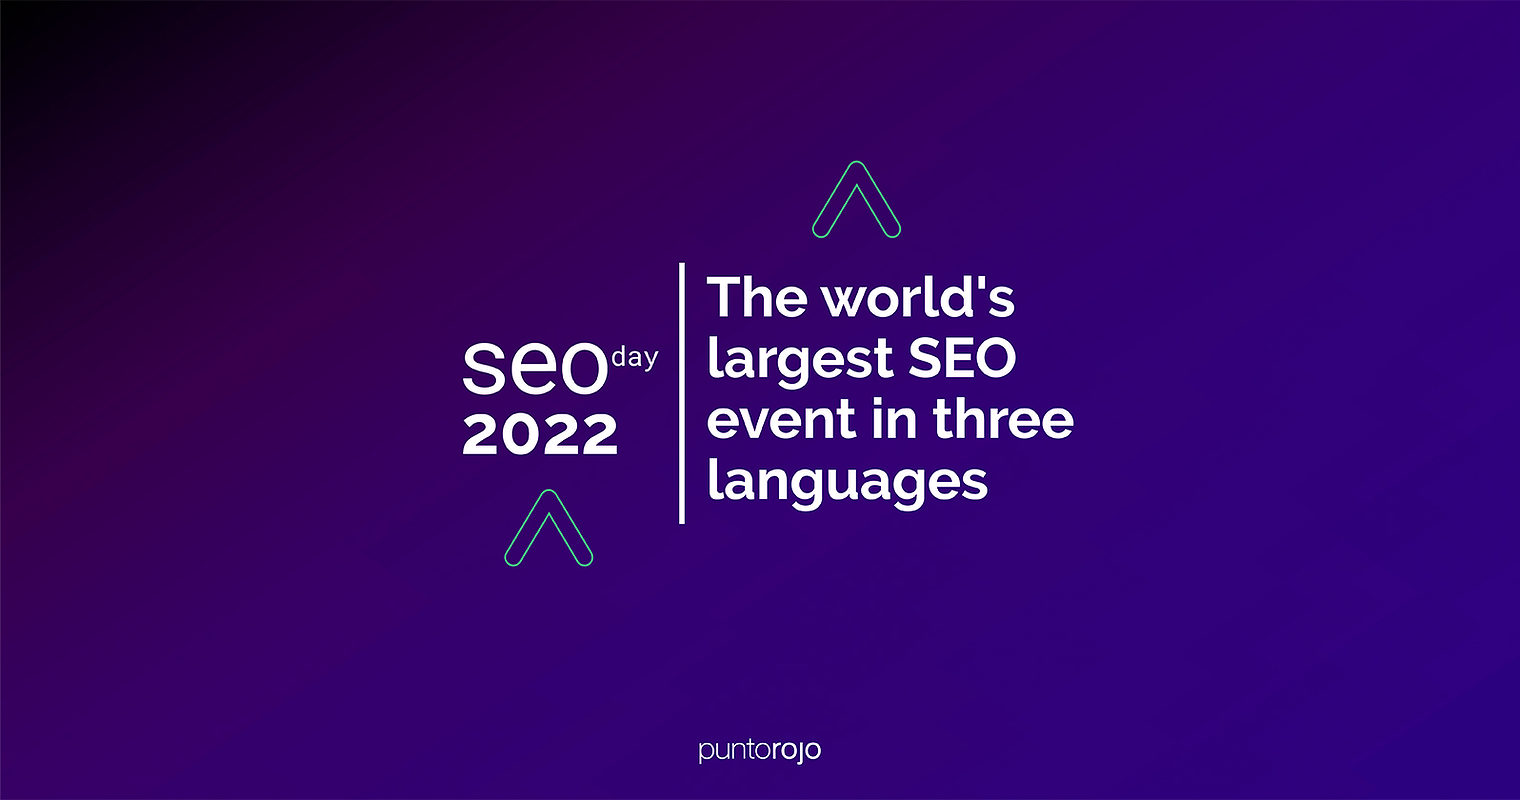 SEOday 2022: The Largest SEO Event In 3 Languages